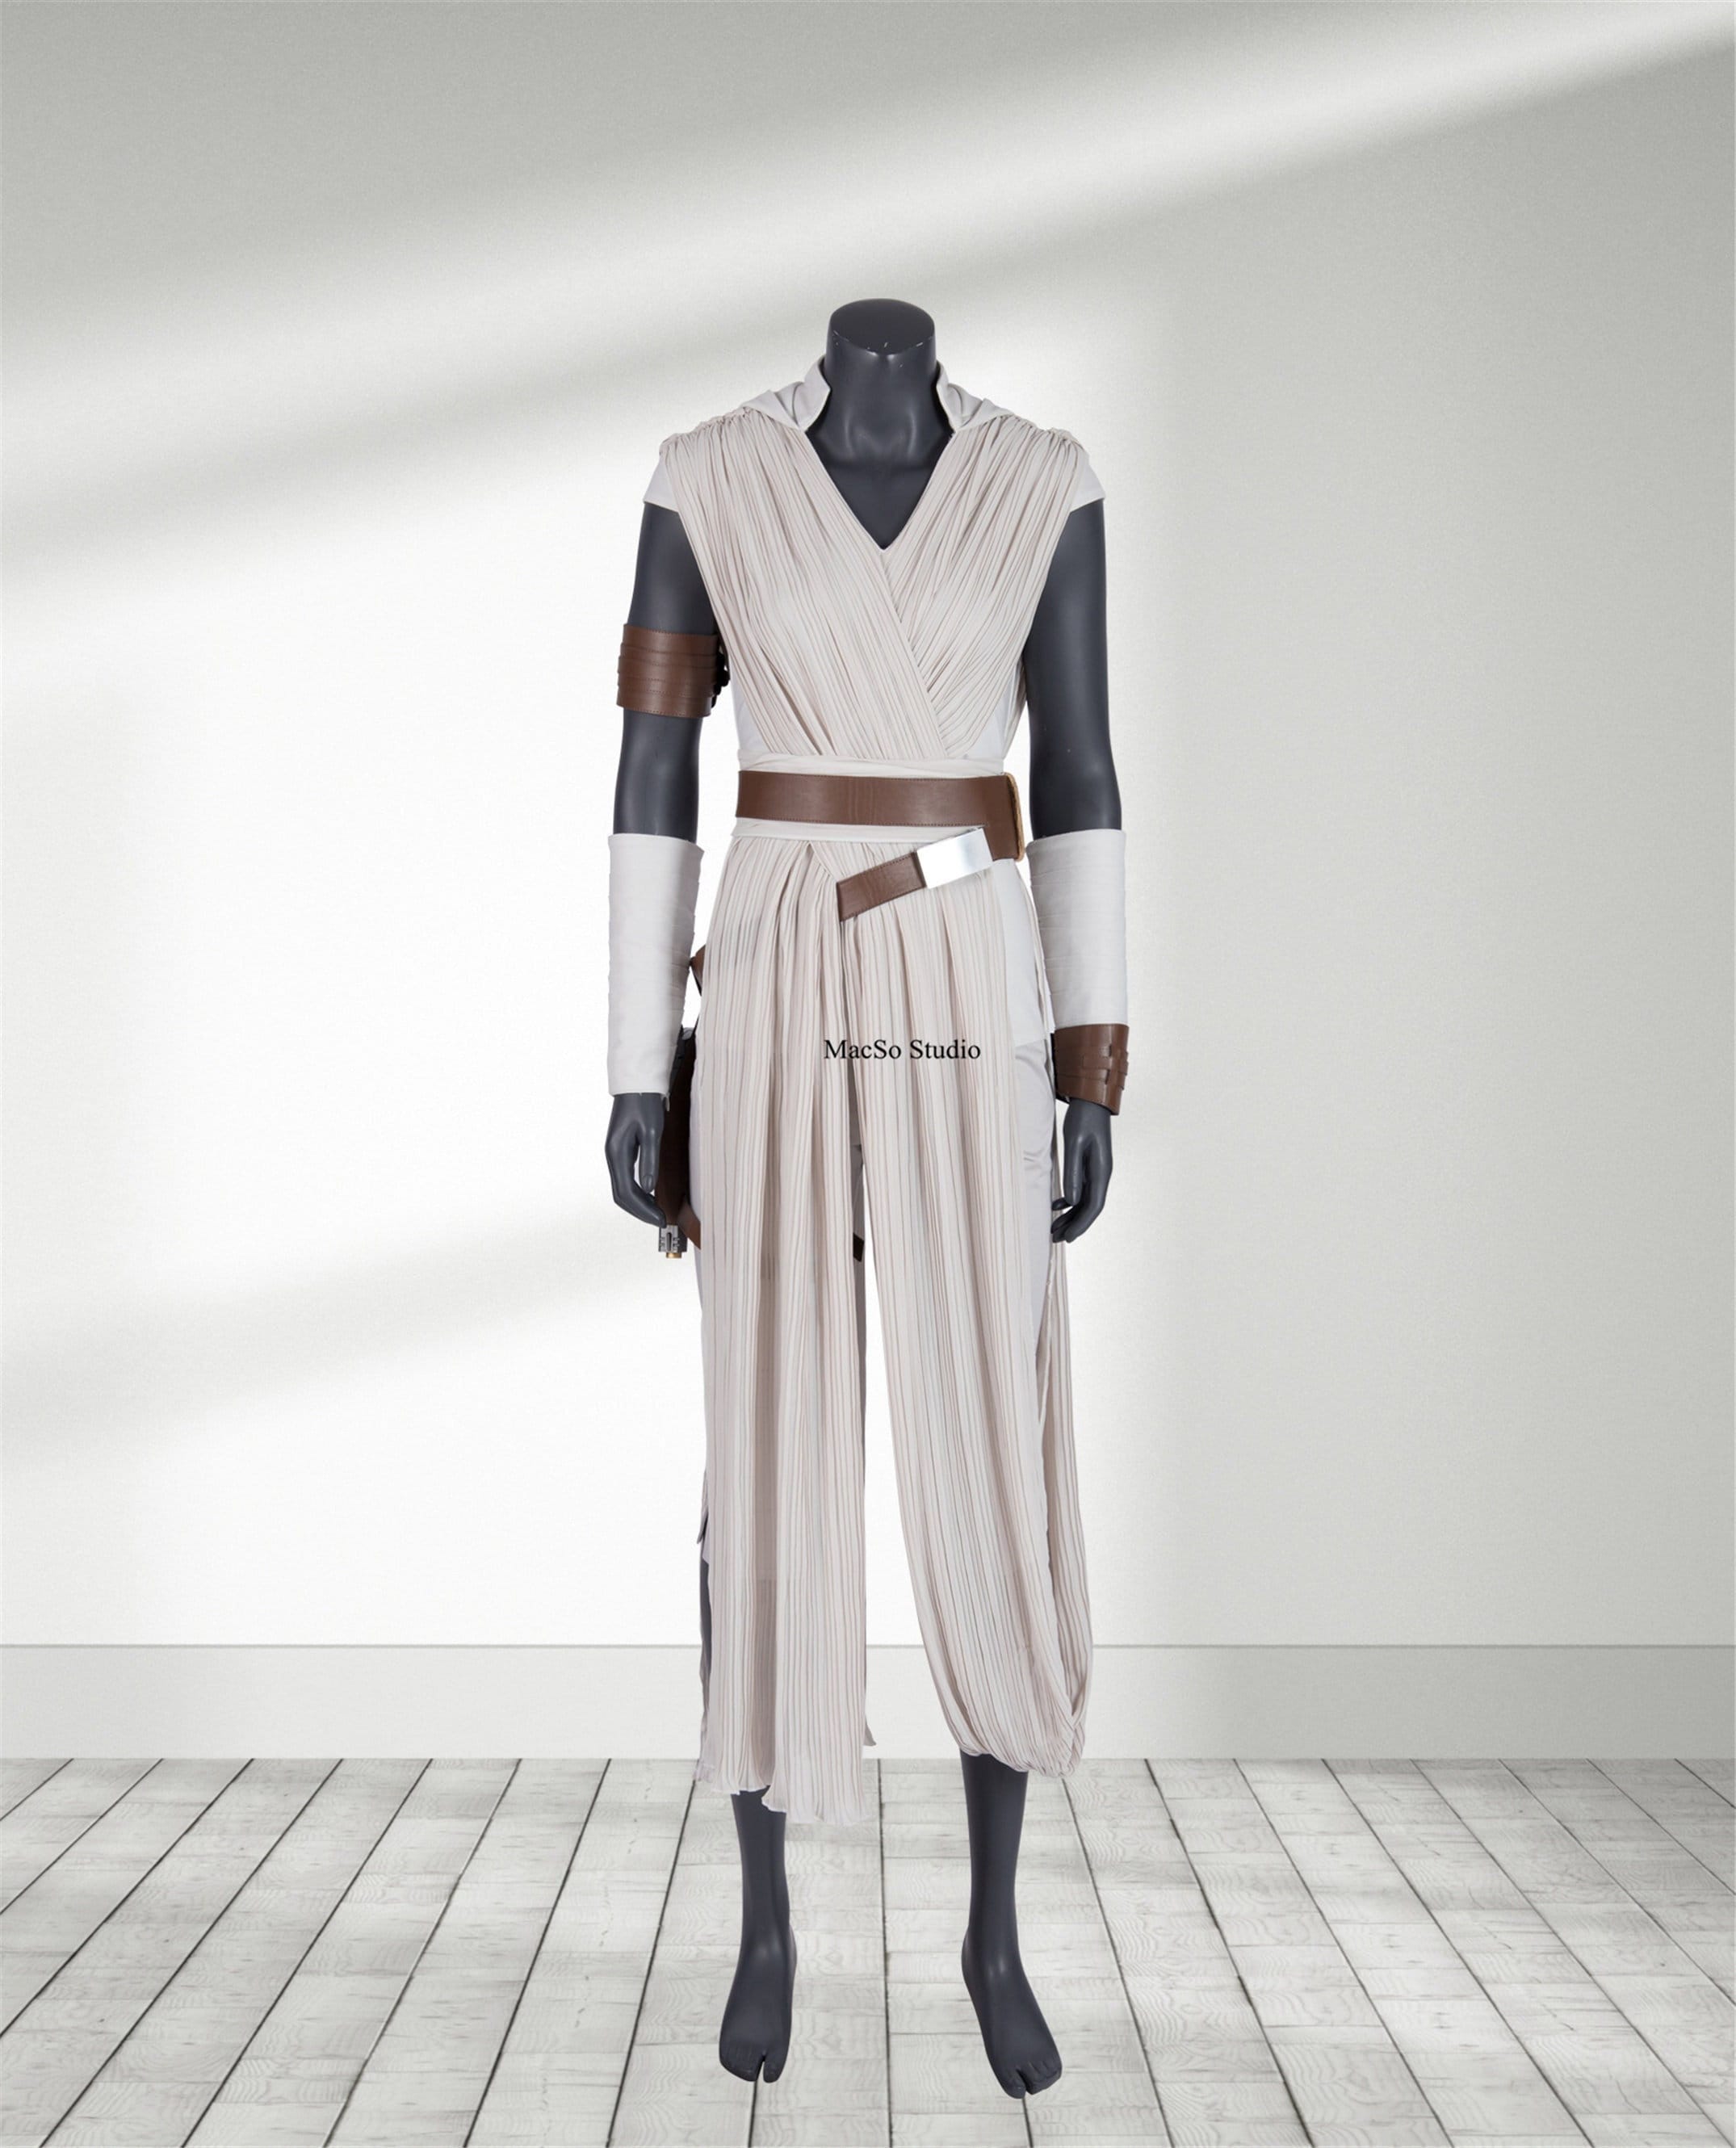 Star Wars 9 The Rise of Skywalker Rey Cosplay Costume Outfit Full Set IN STOCK 